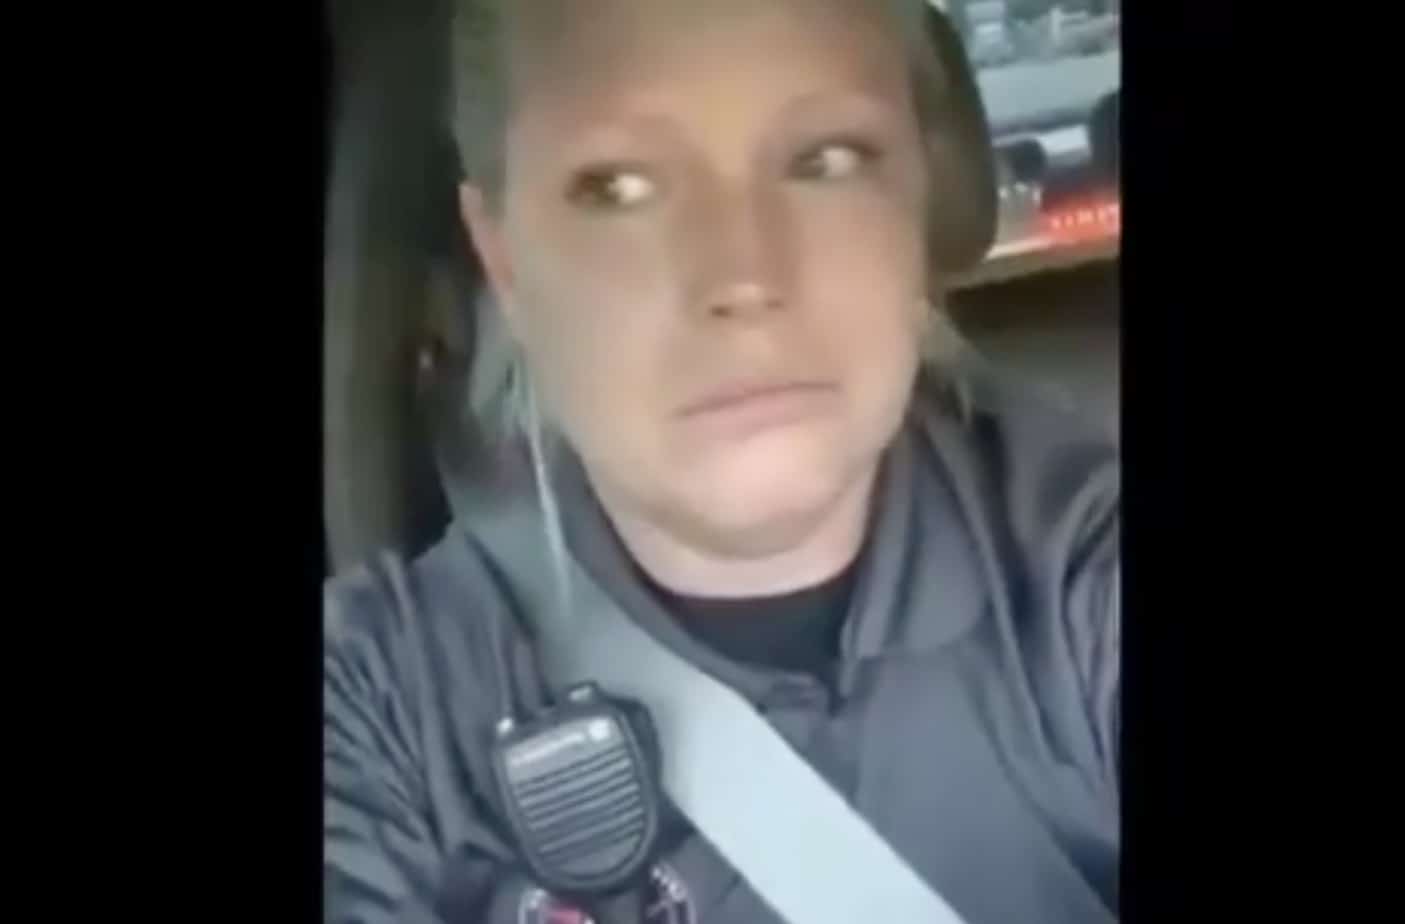 It's a delicate time in America with a lot of raw emotions, but Officer Karen crying about a McDonald's McMuffin may top them all for rawness